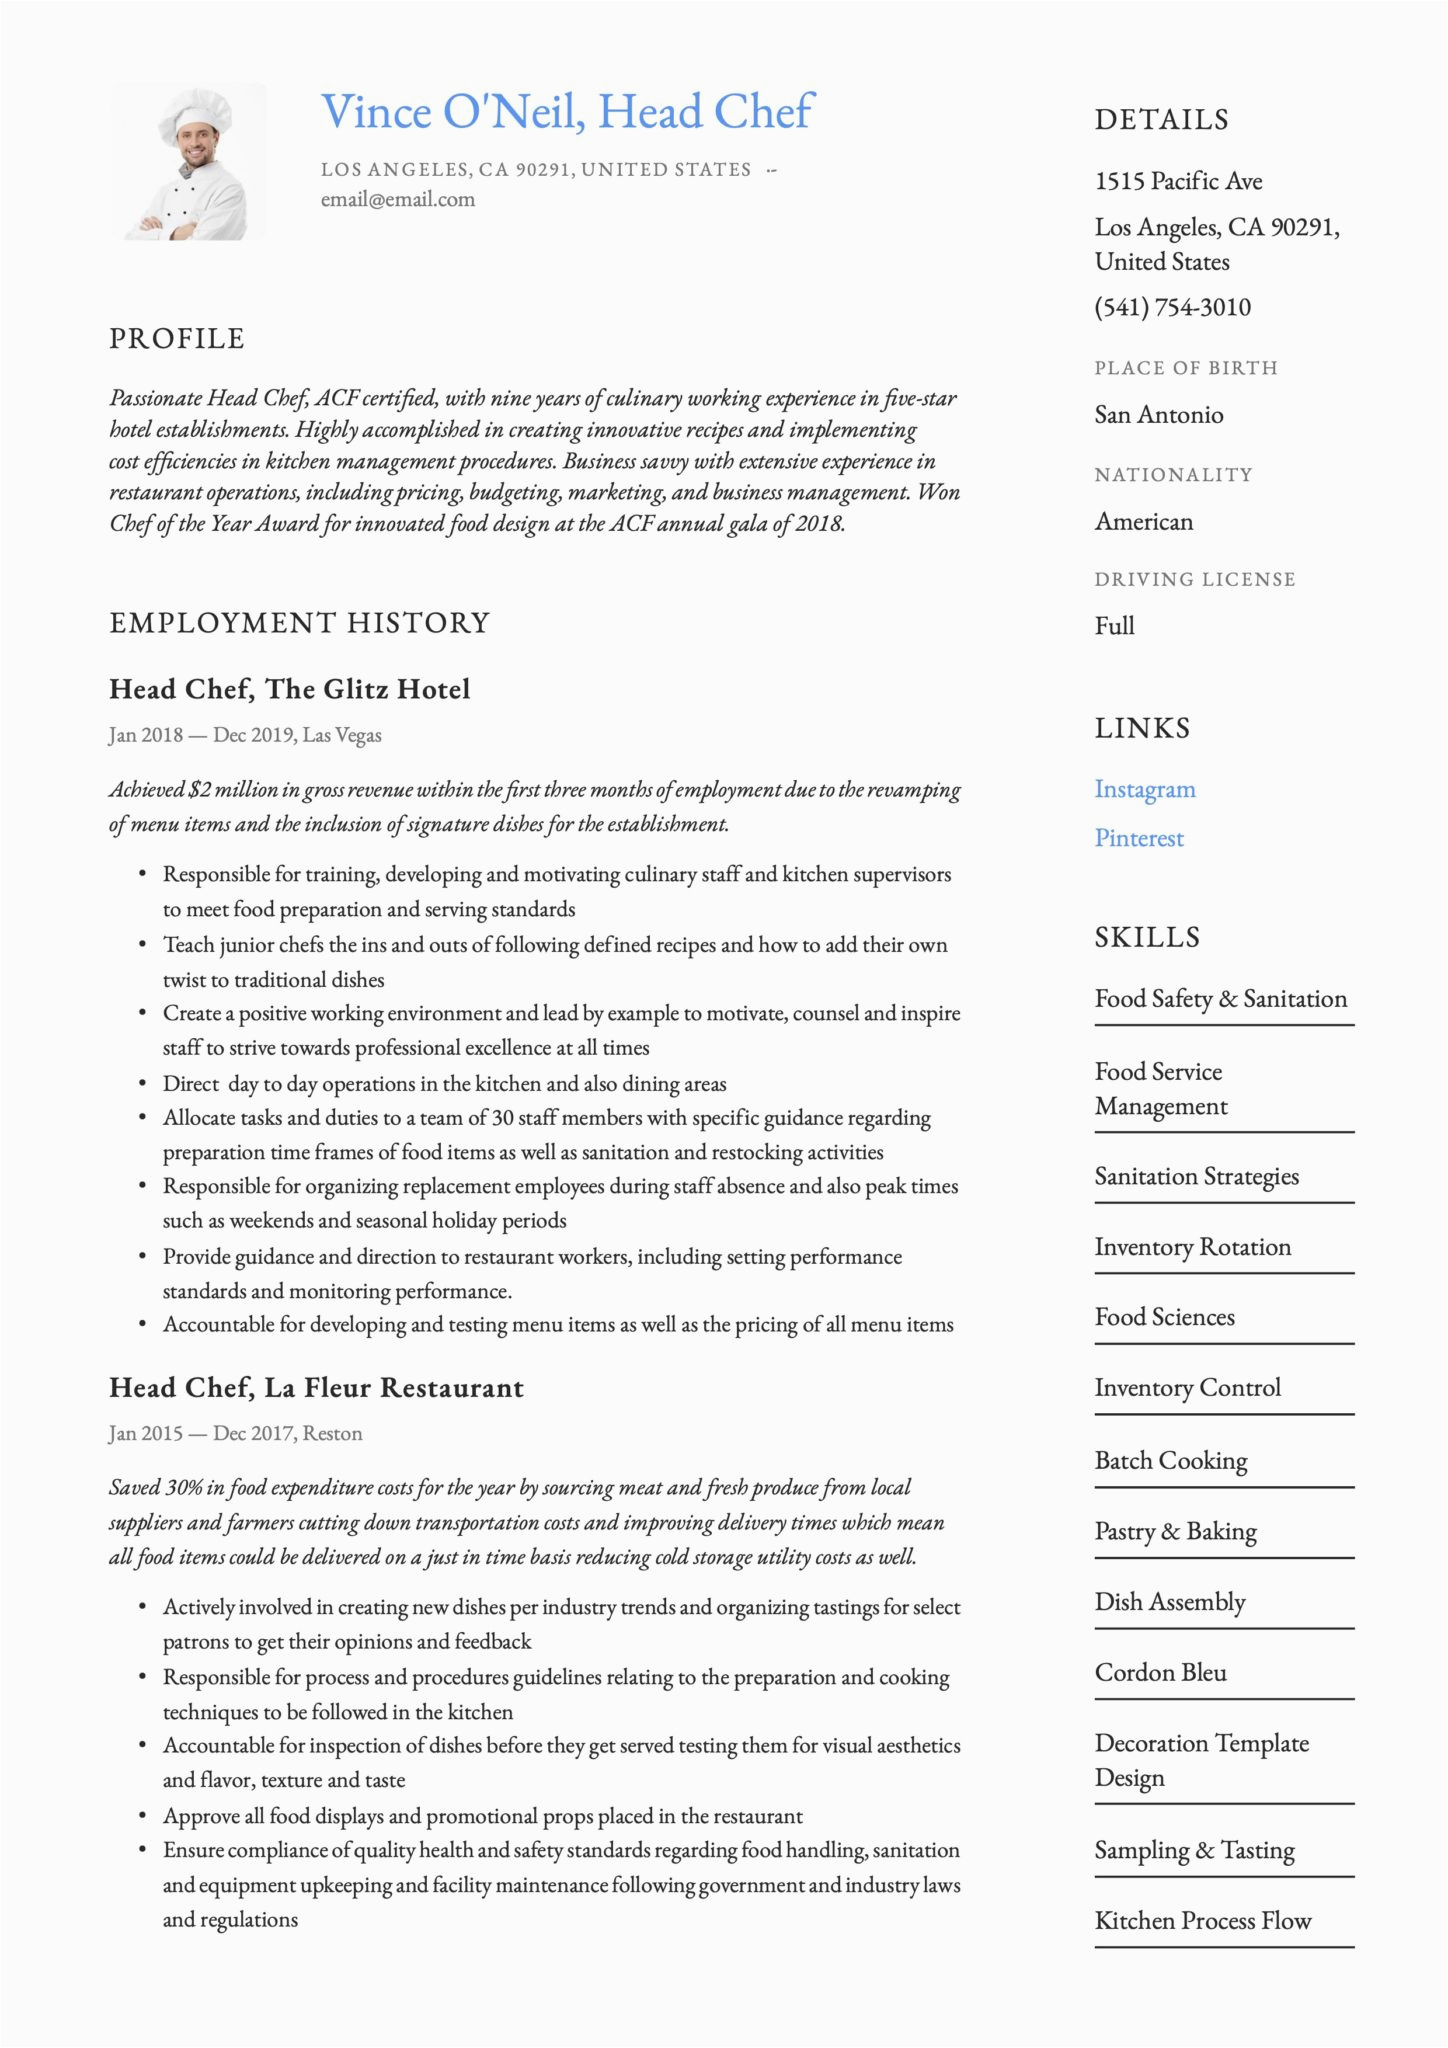 Sample Resume Profile for A Cook Head Chef Resume & Writing Guide 12 Templates